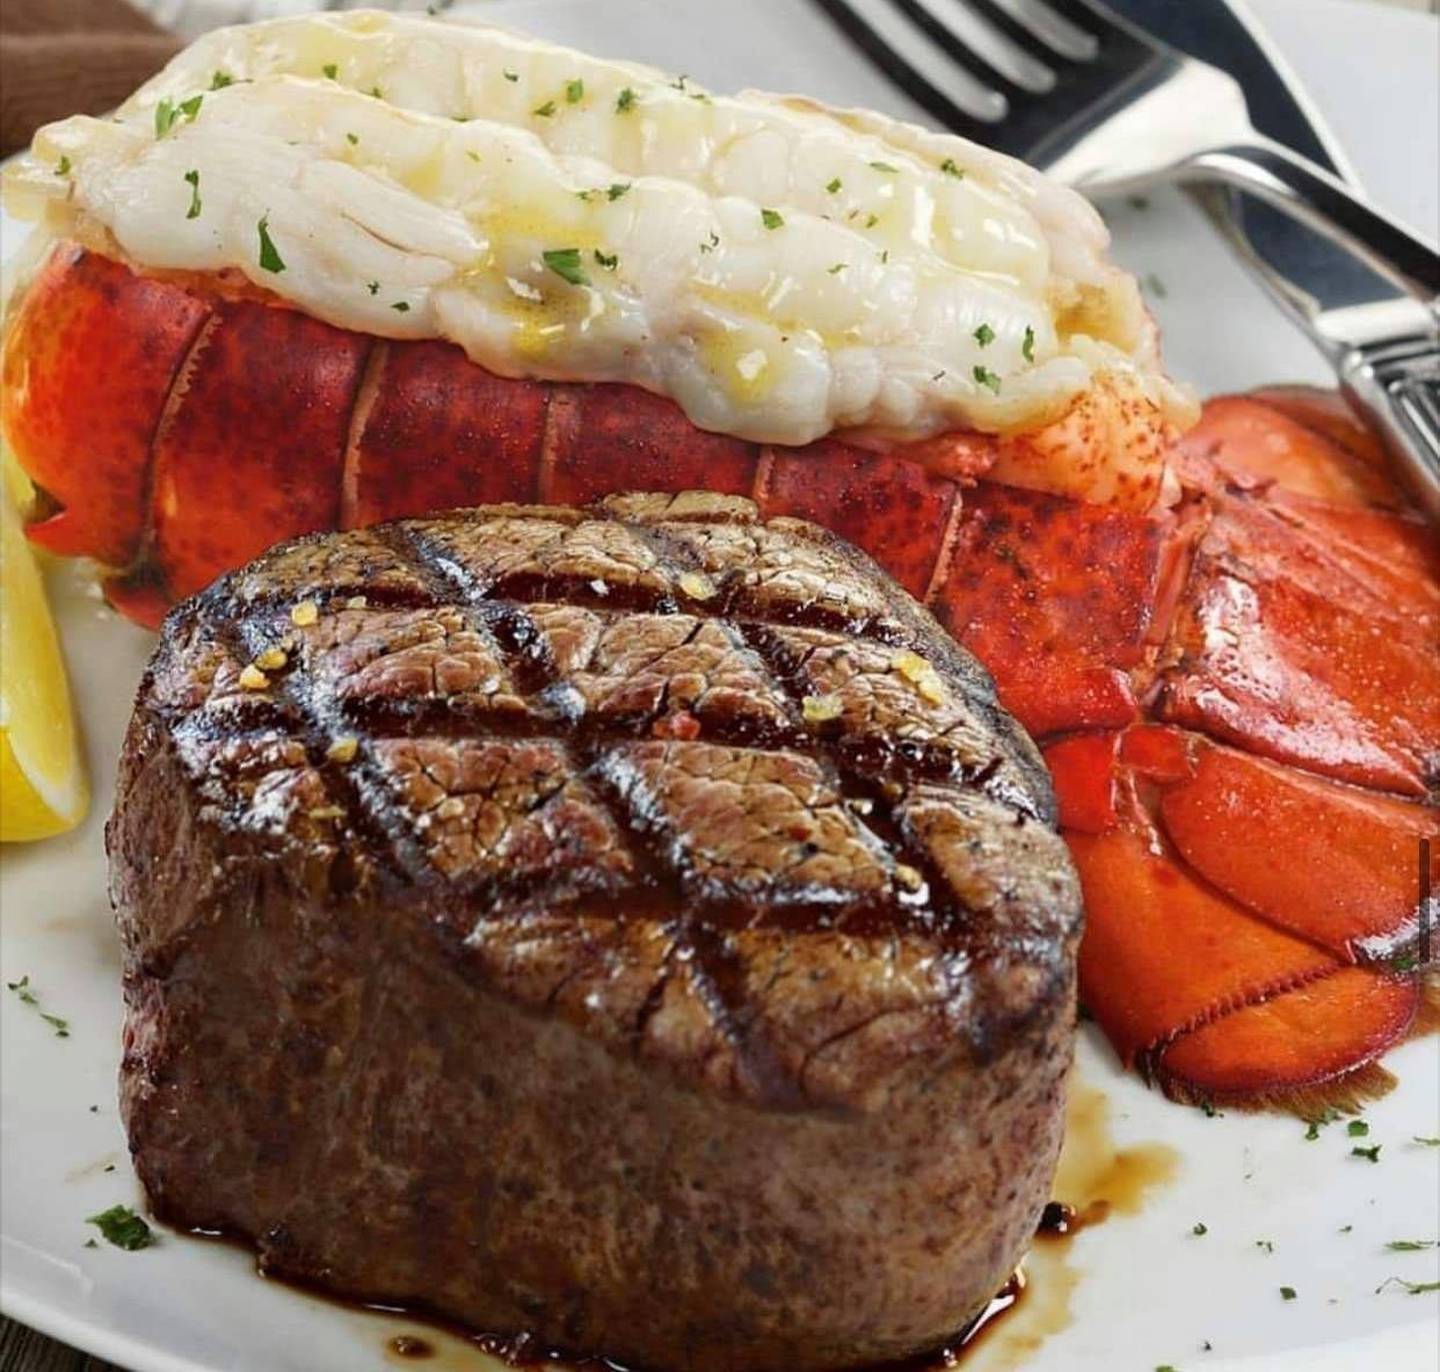 Addison's Steakhouse in McHenry was voted one of the best steakhouses in McHenry County by readers in 2021. (Photo from Addison's Steakhouse Facebook page)